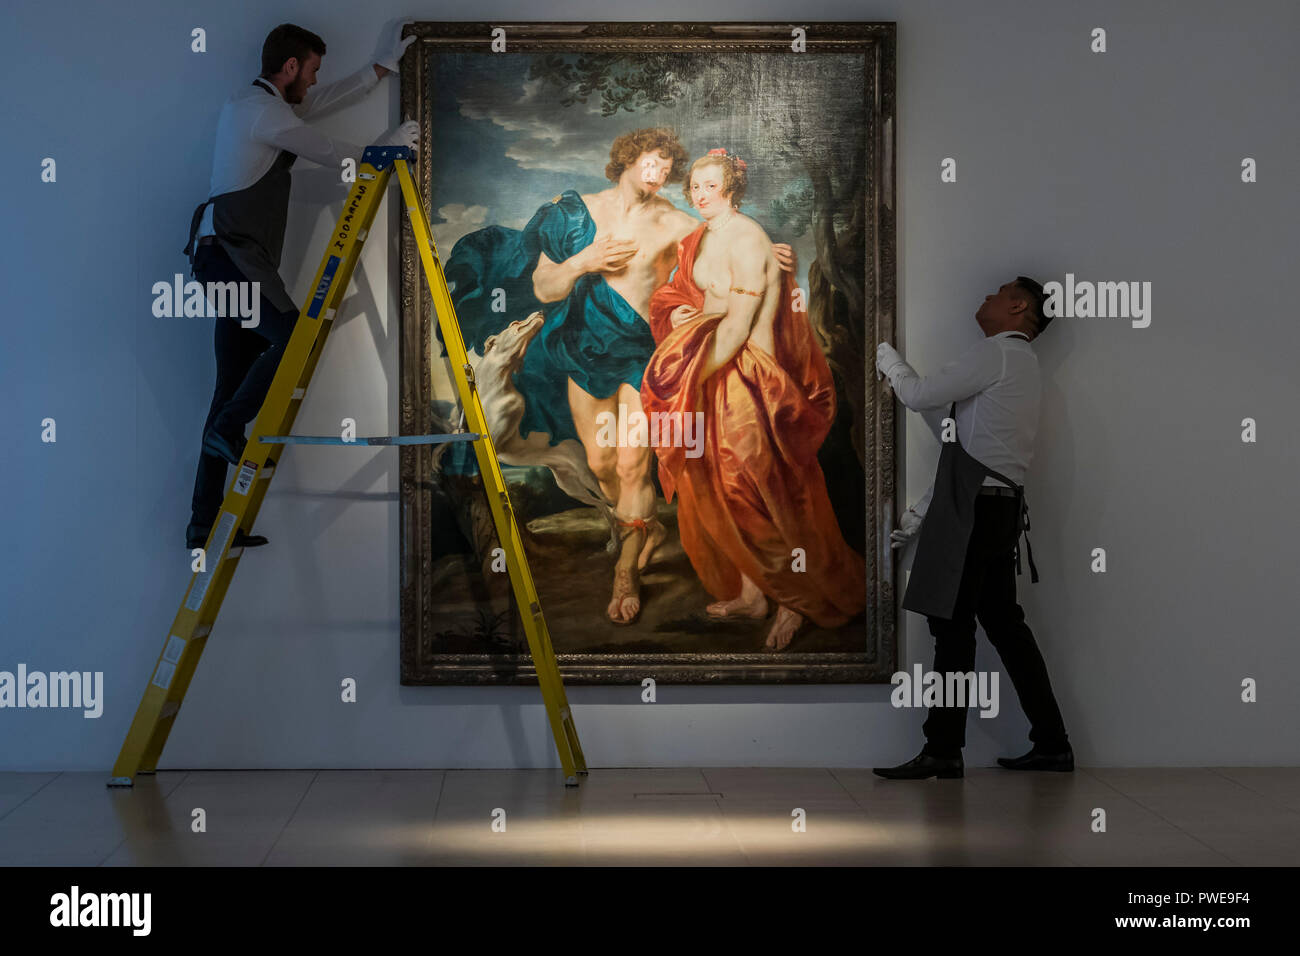 London, UK 16th Oct 2018Van Dyck, Venus and Adonis, est £2.5-3.5m - A preview of a two-part sale of The Eric Albada Jelgersma Collection in London on 6 & 7 December. Credit: Guy Bell/Alamy Live News Stock Photo